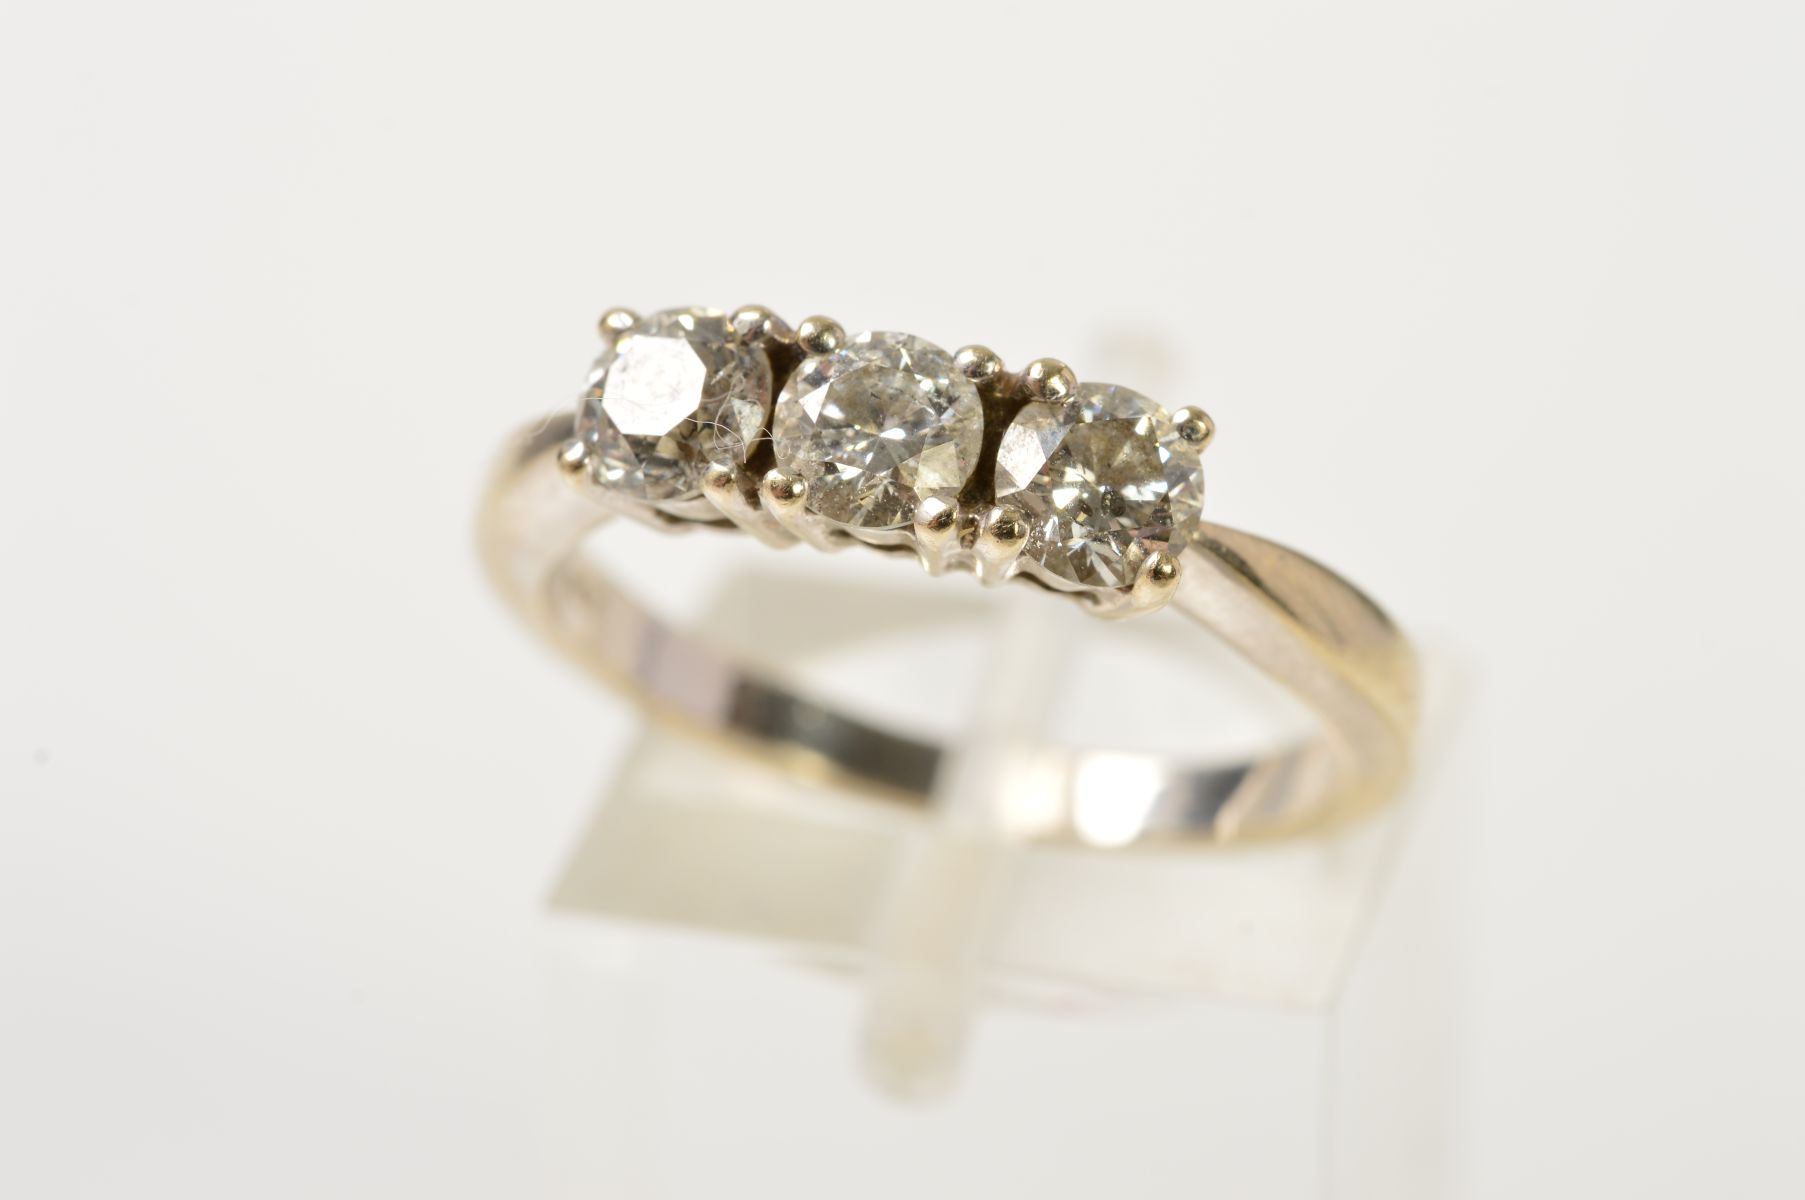 AN 18CT GOLD THREE STONE DIAMOND RING, designed as three brilliant cut diamonds, each within a - Image 2 of 3